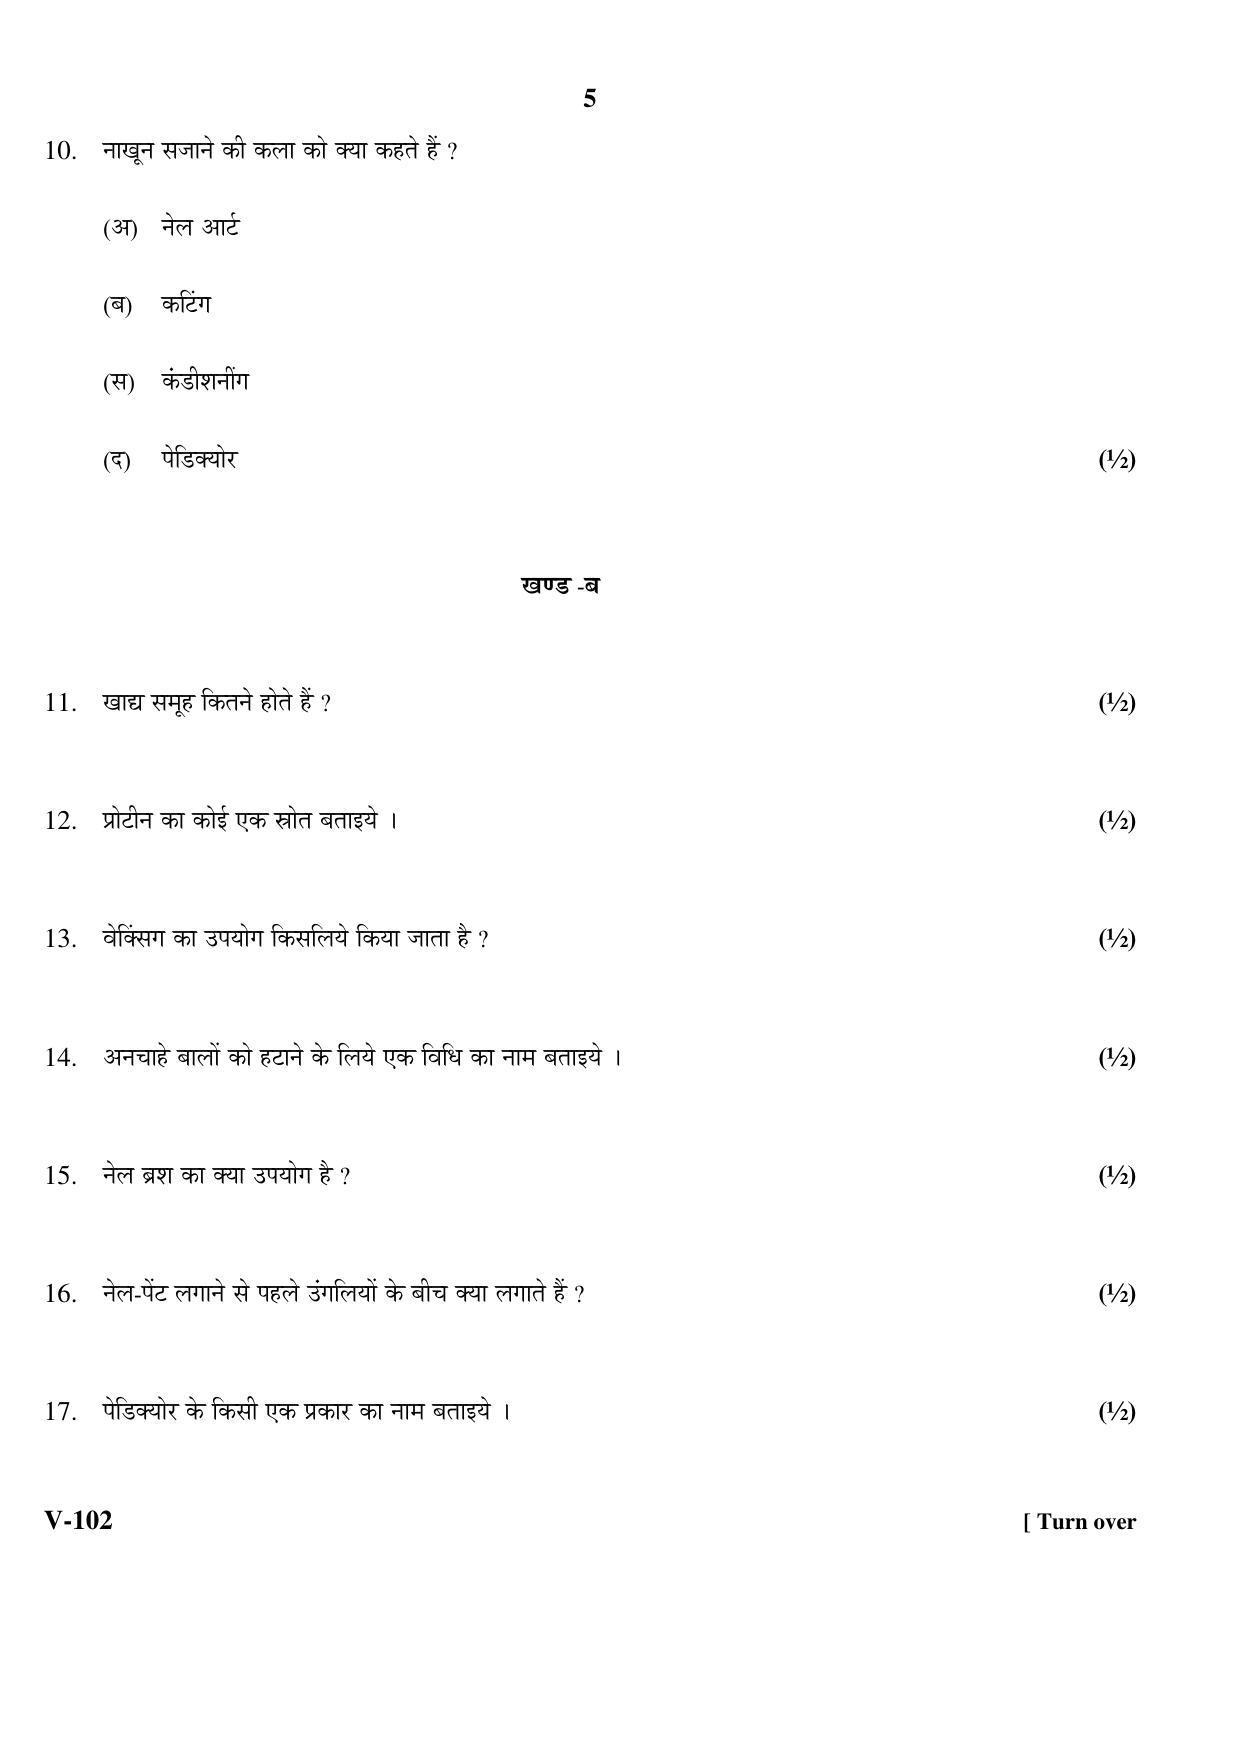 RBSE 2017 Class 10 Beauty-Health (Vocational) Question Paper - Page 5